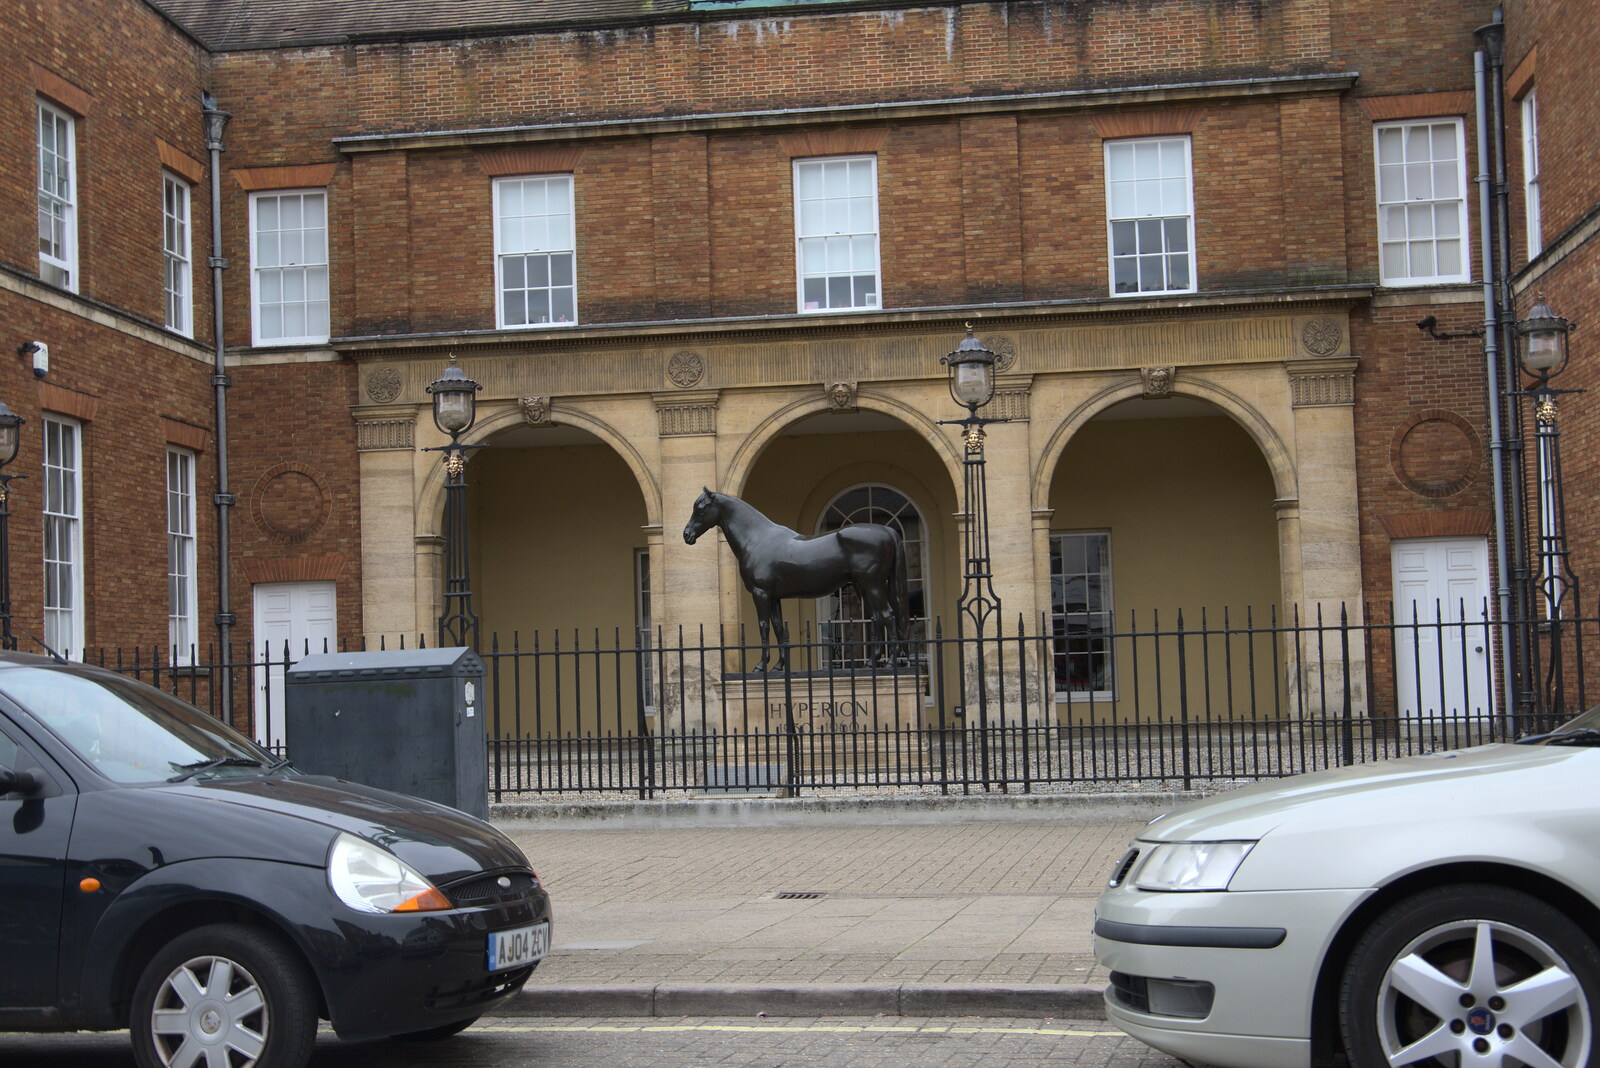 A statue of a thoroughbred horse from Petay's Wedding Reception, Fanhams Hall, Ware, Hertfordshire - 20th August 2021